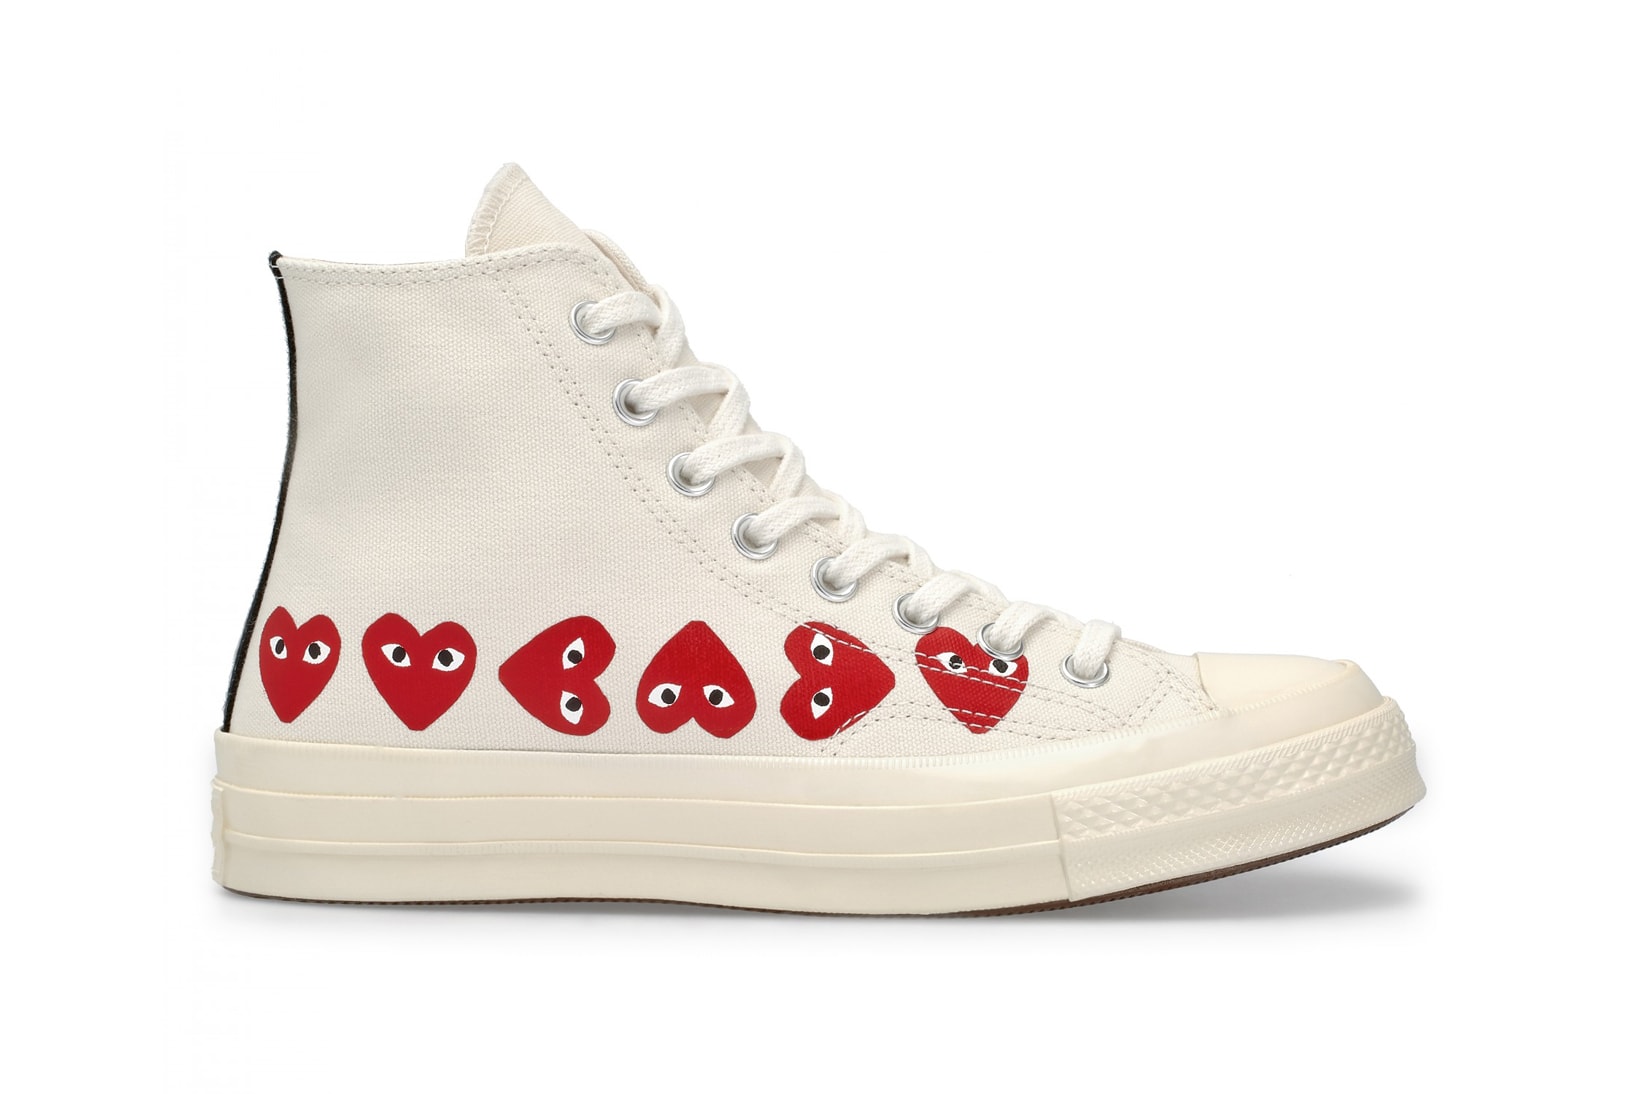 COMME des GARCONS x Converse All Star High Top White